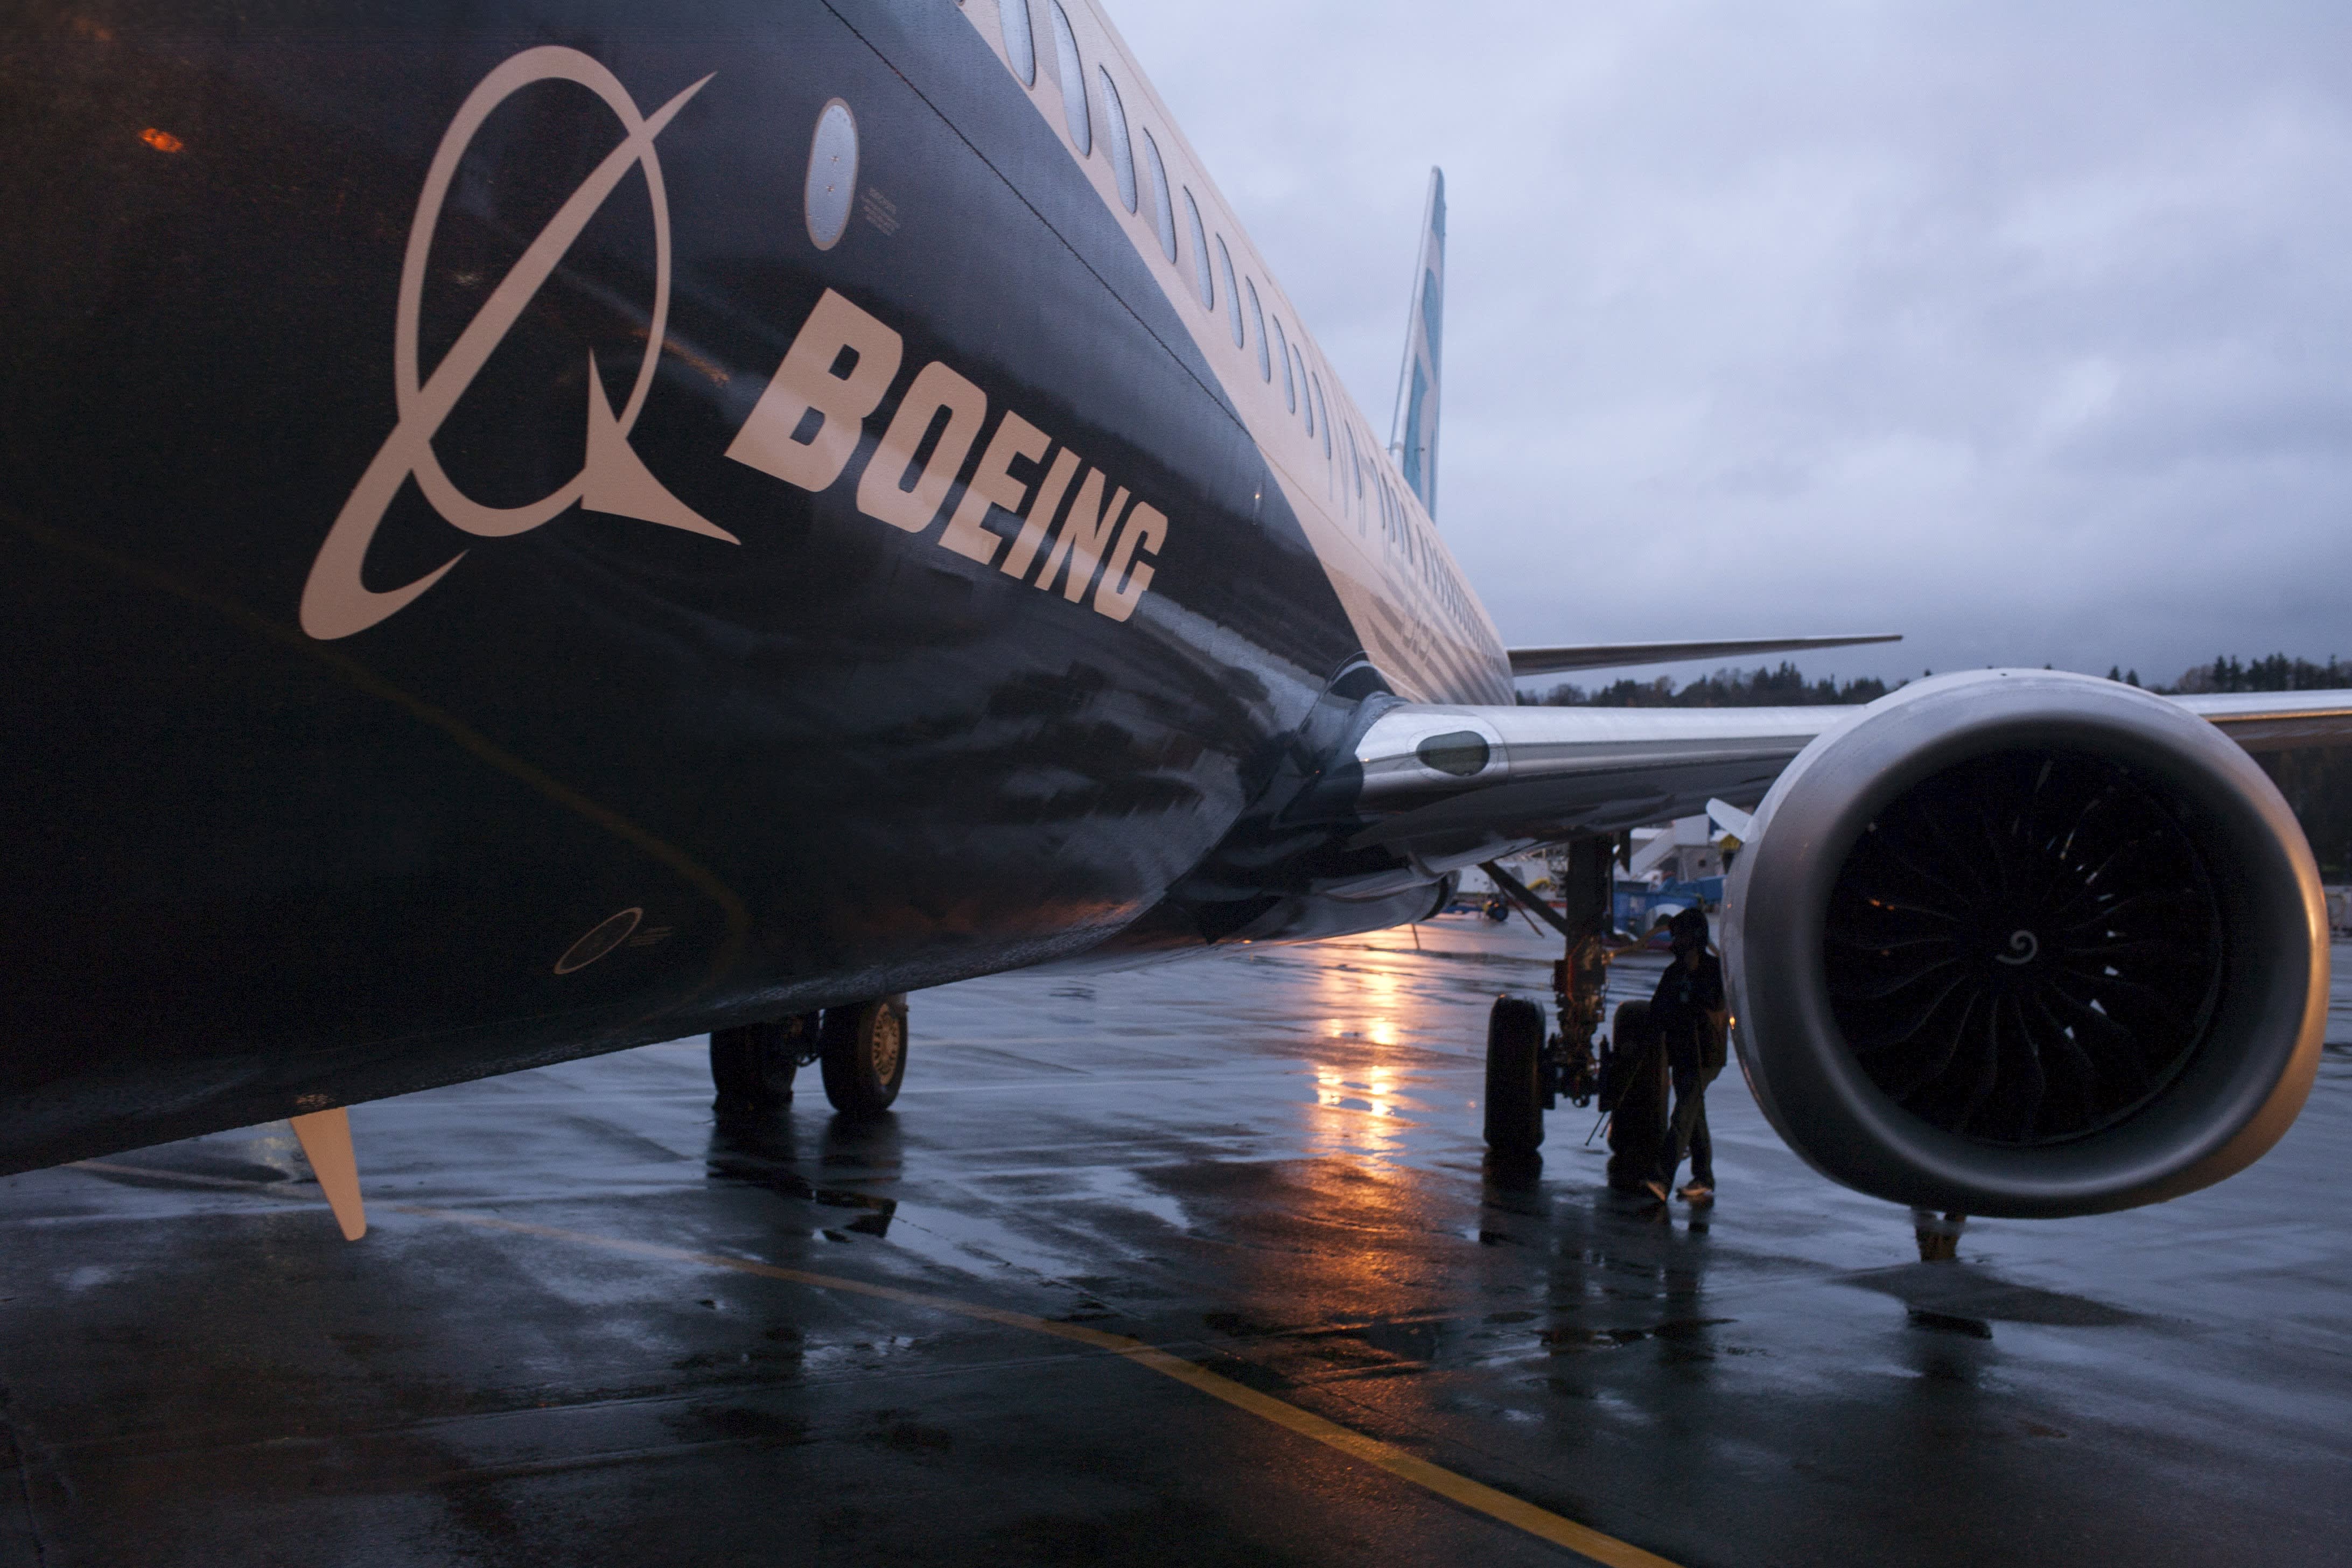 Boeing delivers 22 jets in August; 737 Max ‘white tails’ nearly gone